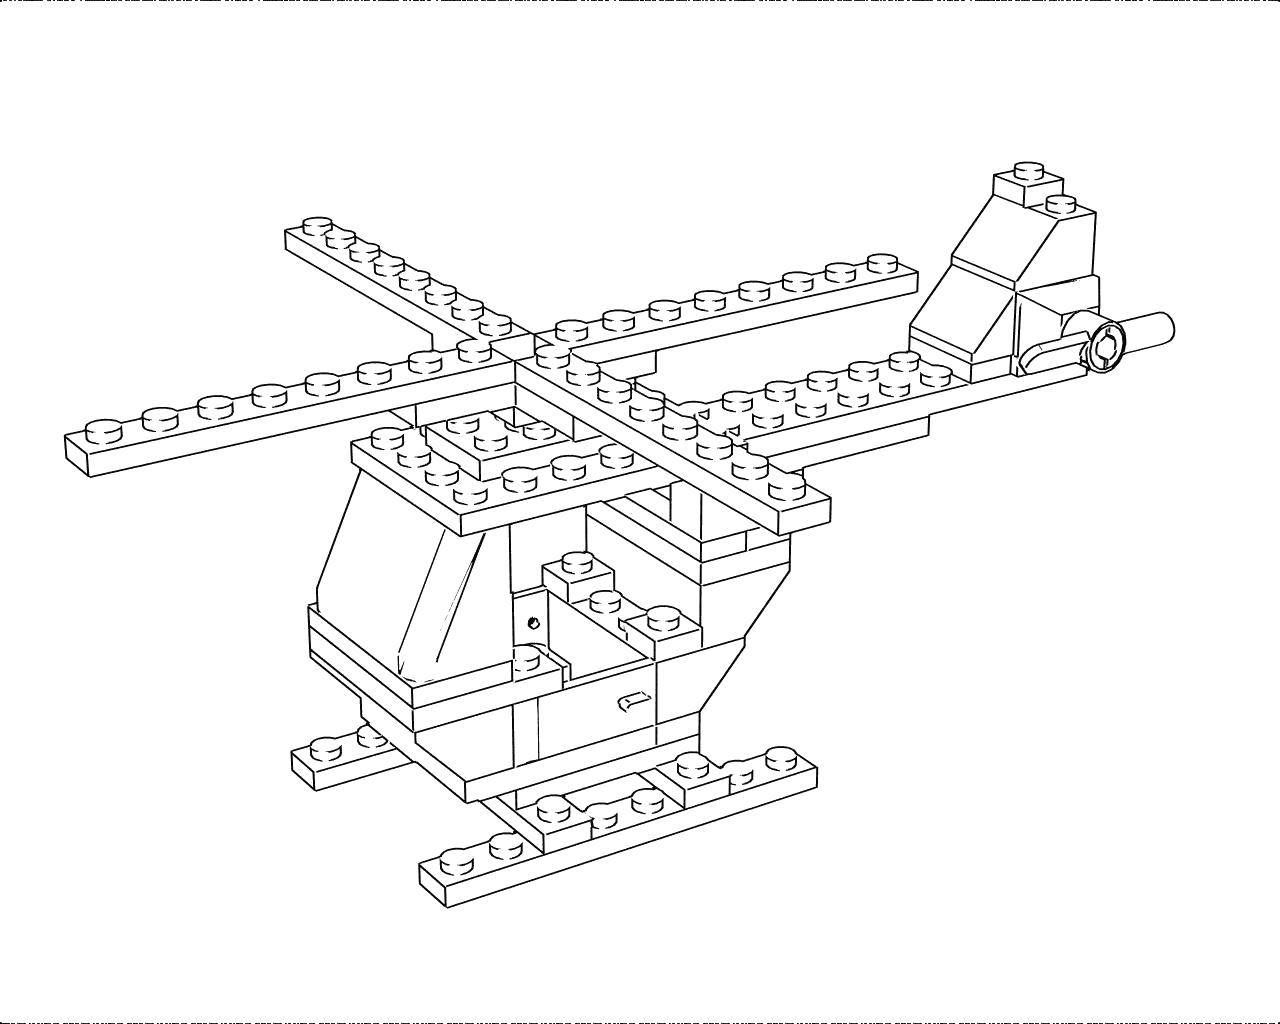 Coloring Helicopter LEGO. Category Helicopters. Tags:  Gunship, LEGO.